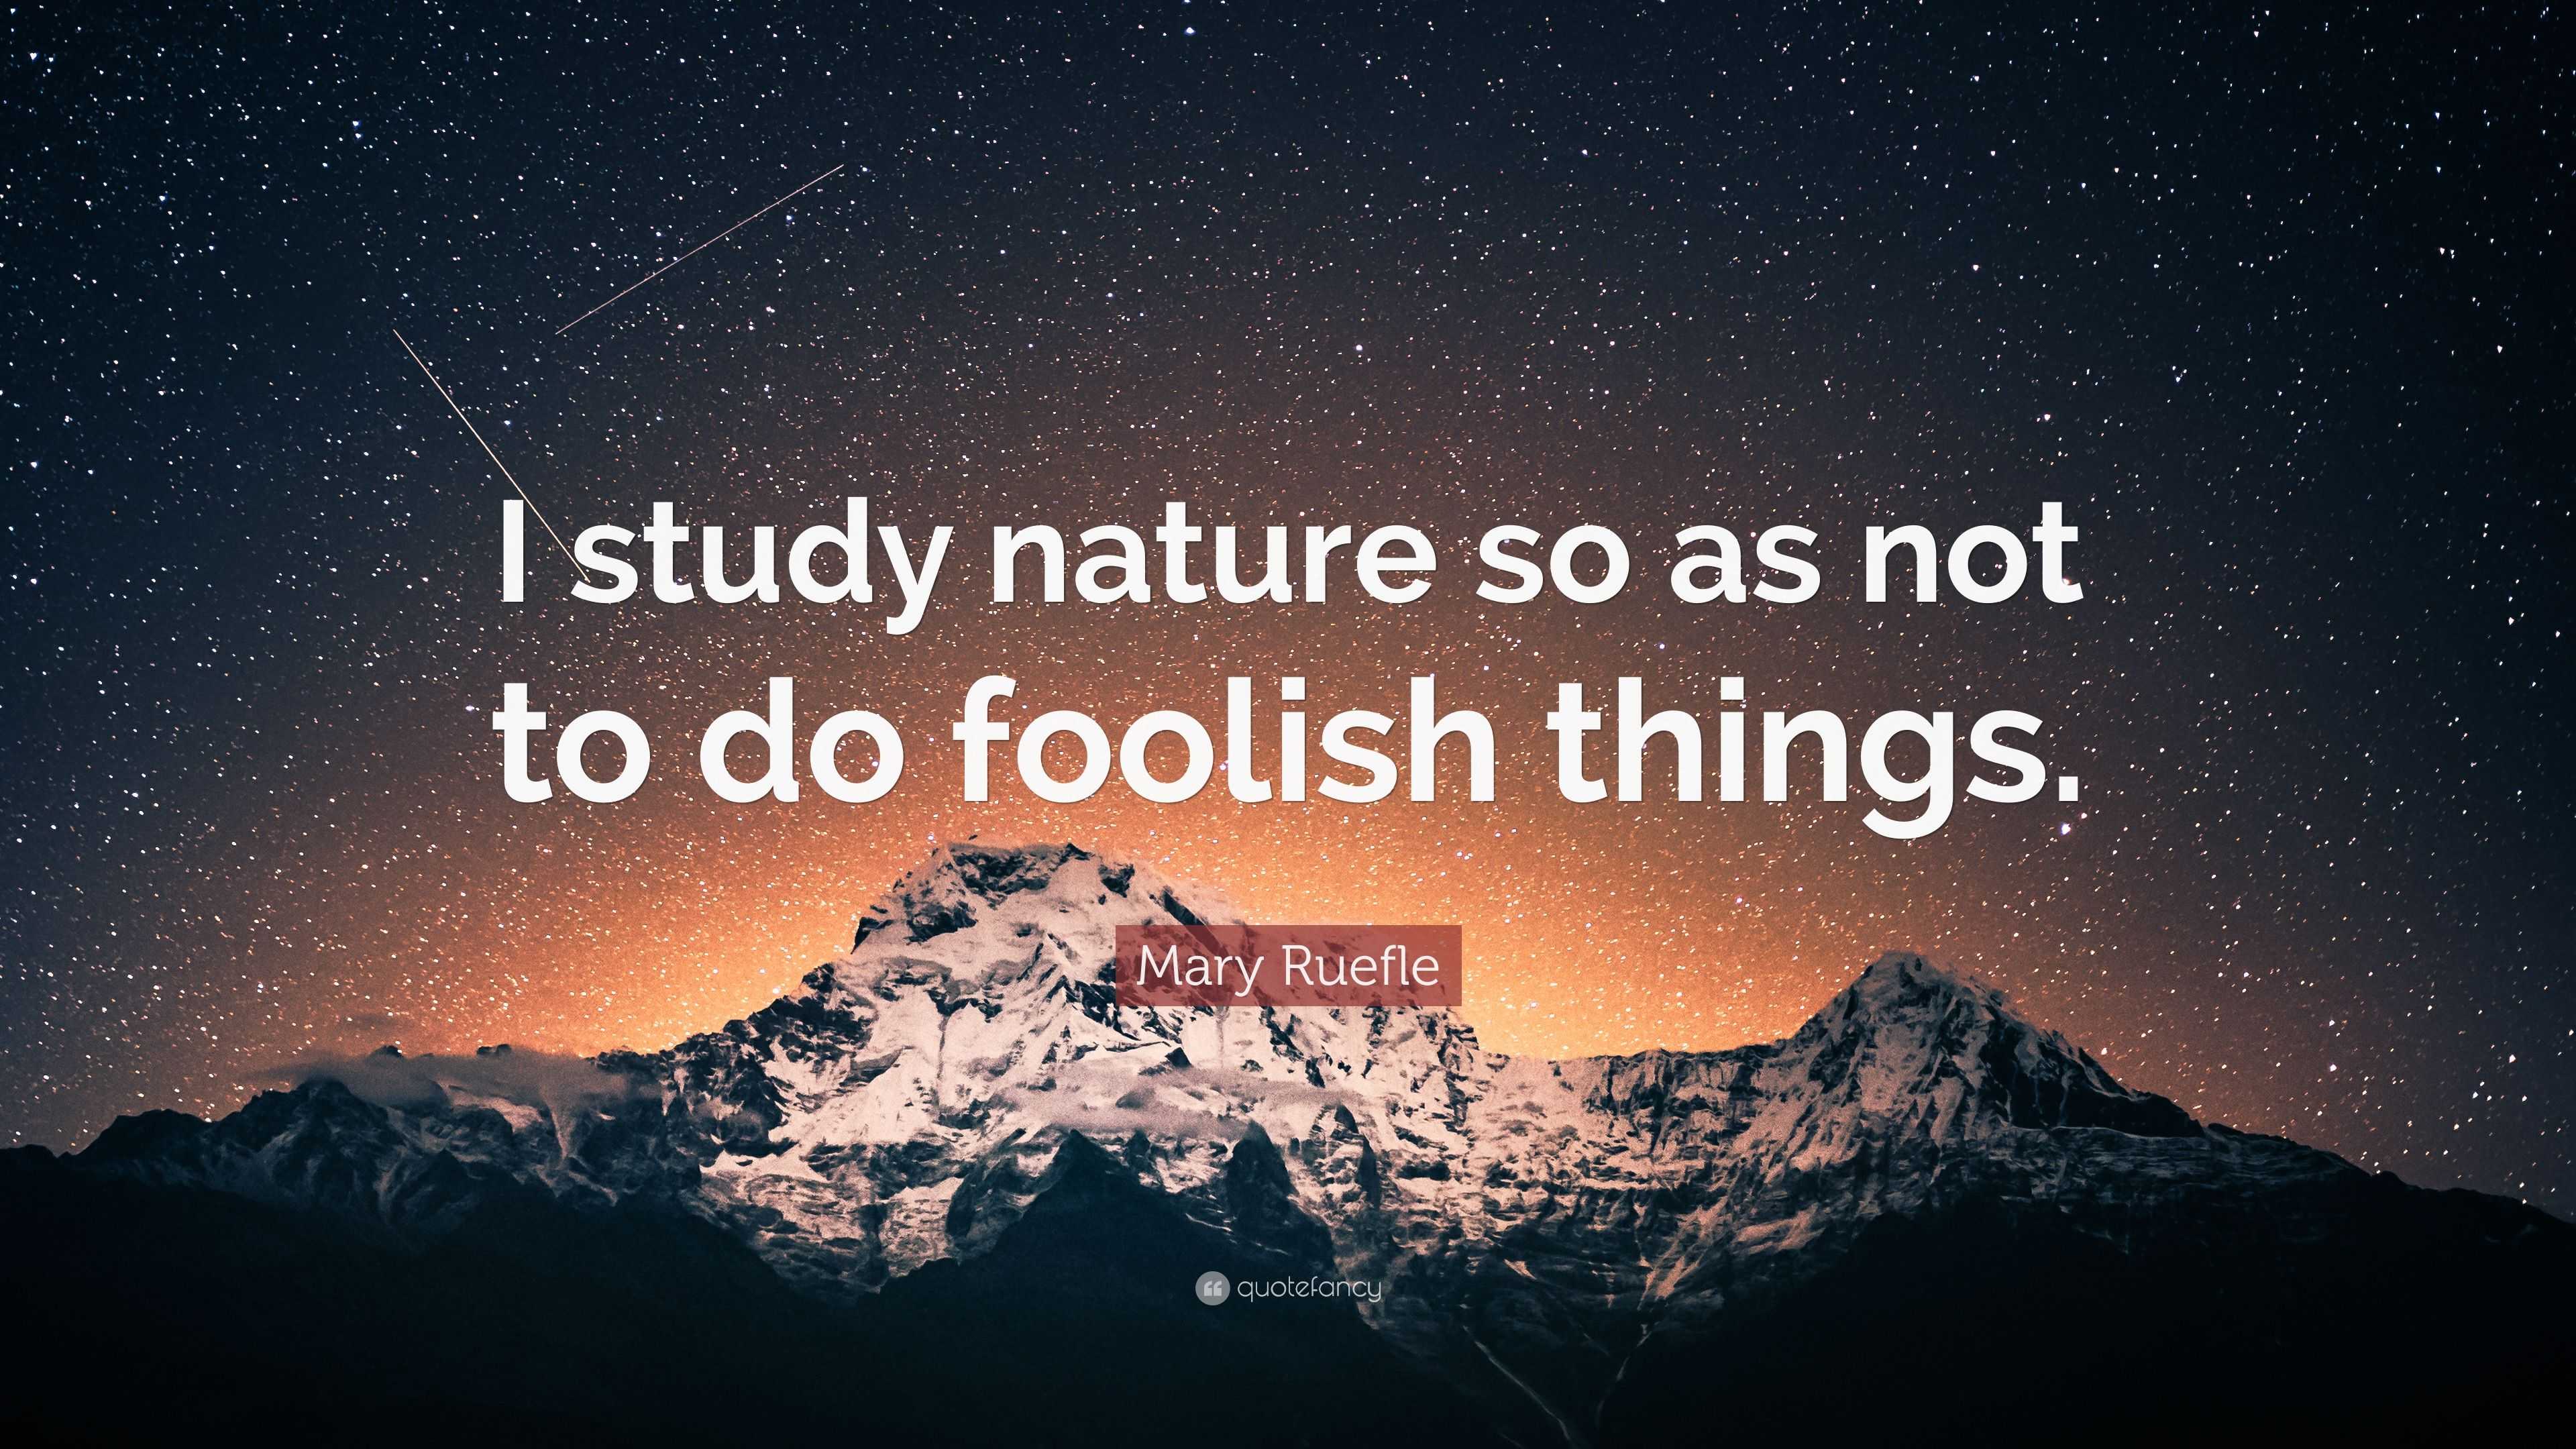 Mary Ruefle Quote: “I study nature so as not to do foolish things.”